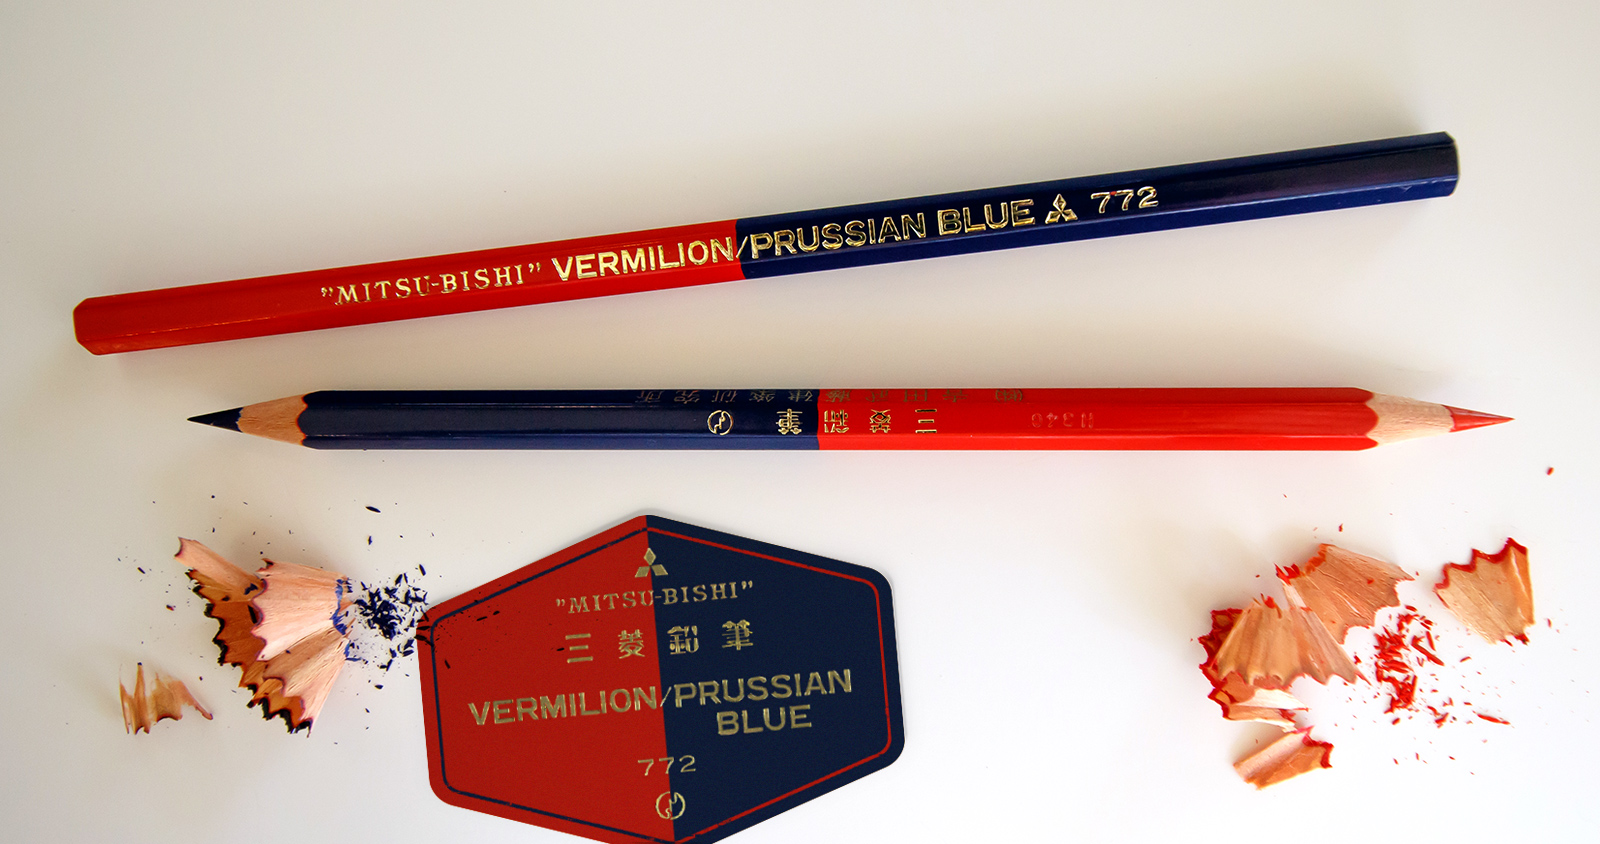 Mitsubishi Red Blue Colored Pencils with sticker